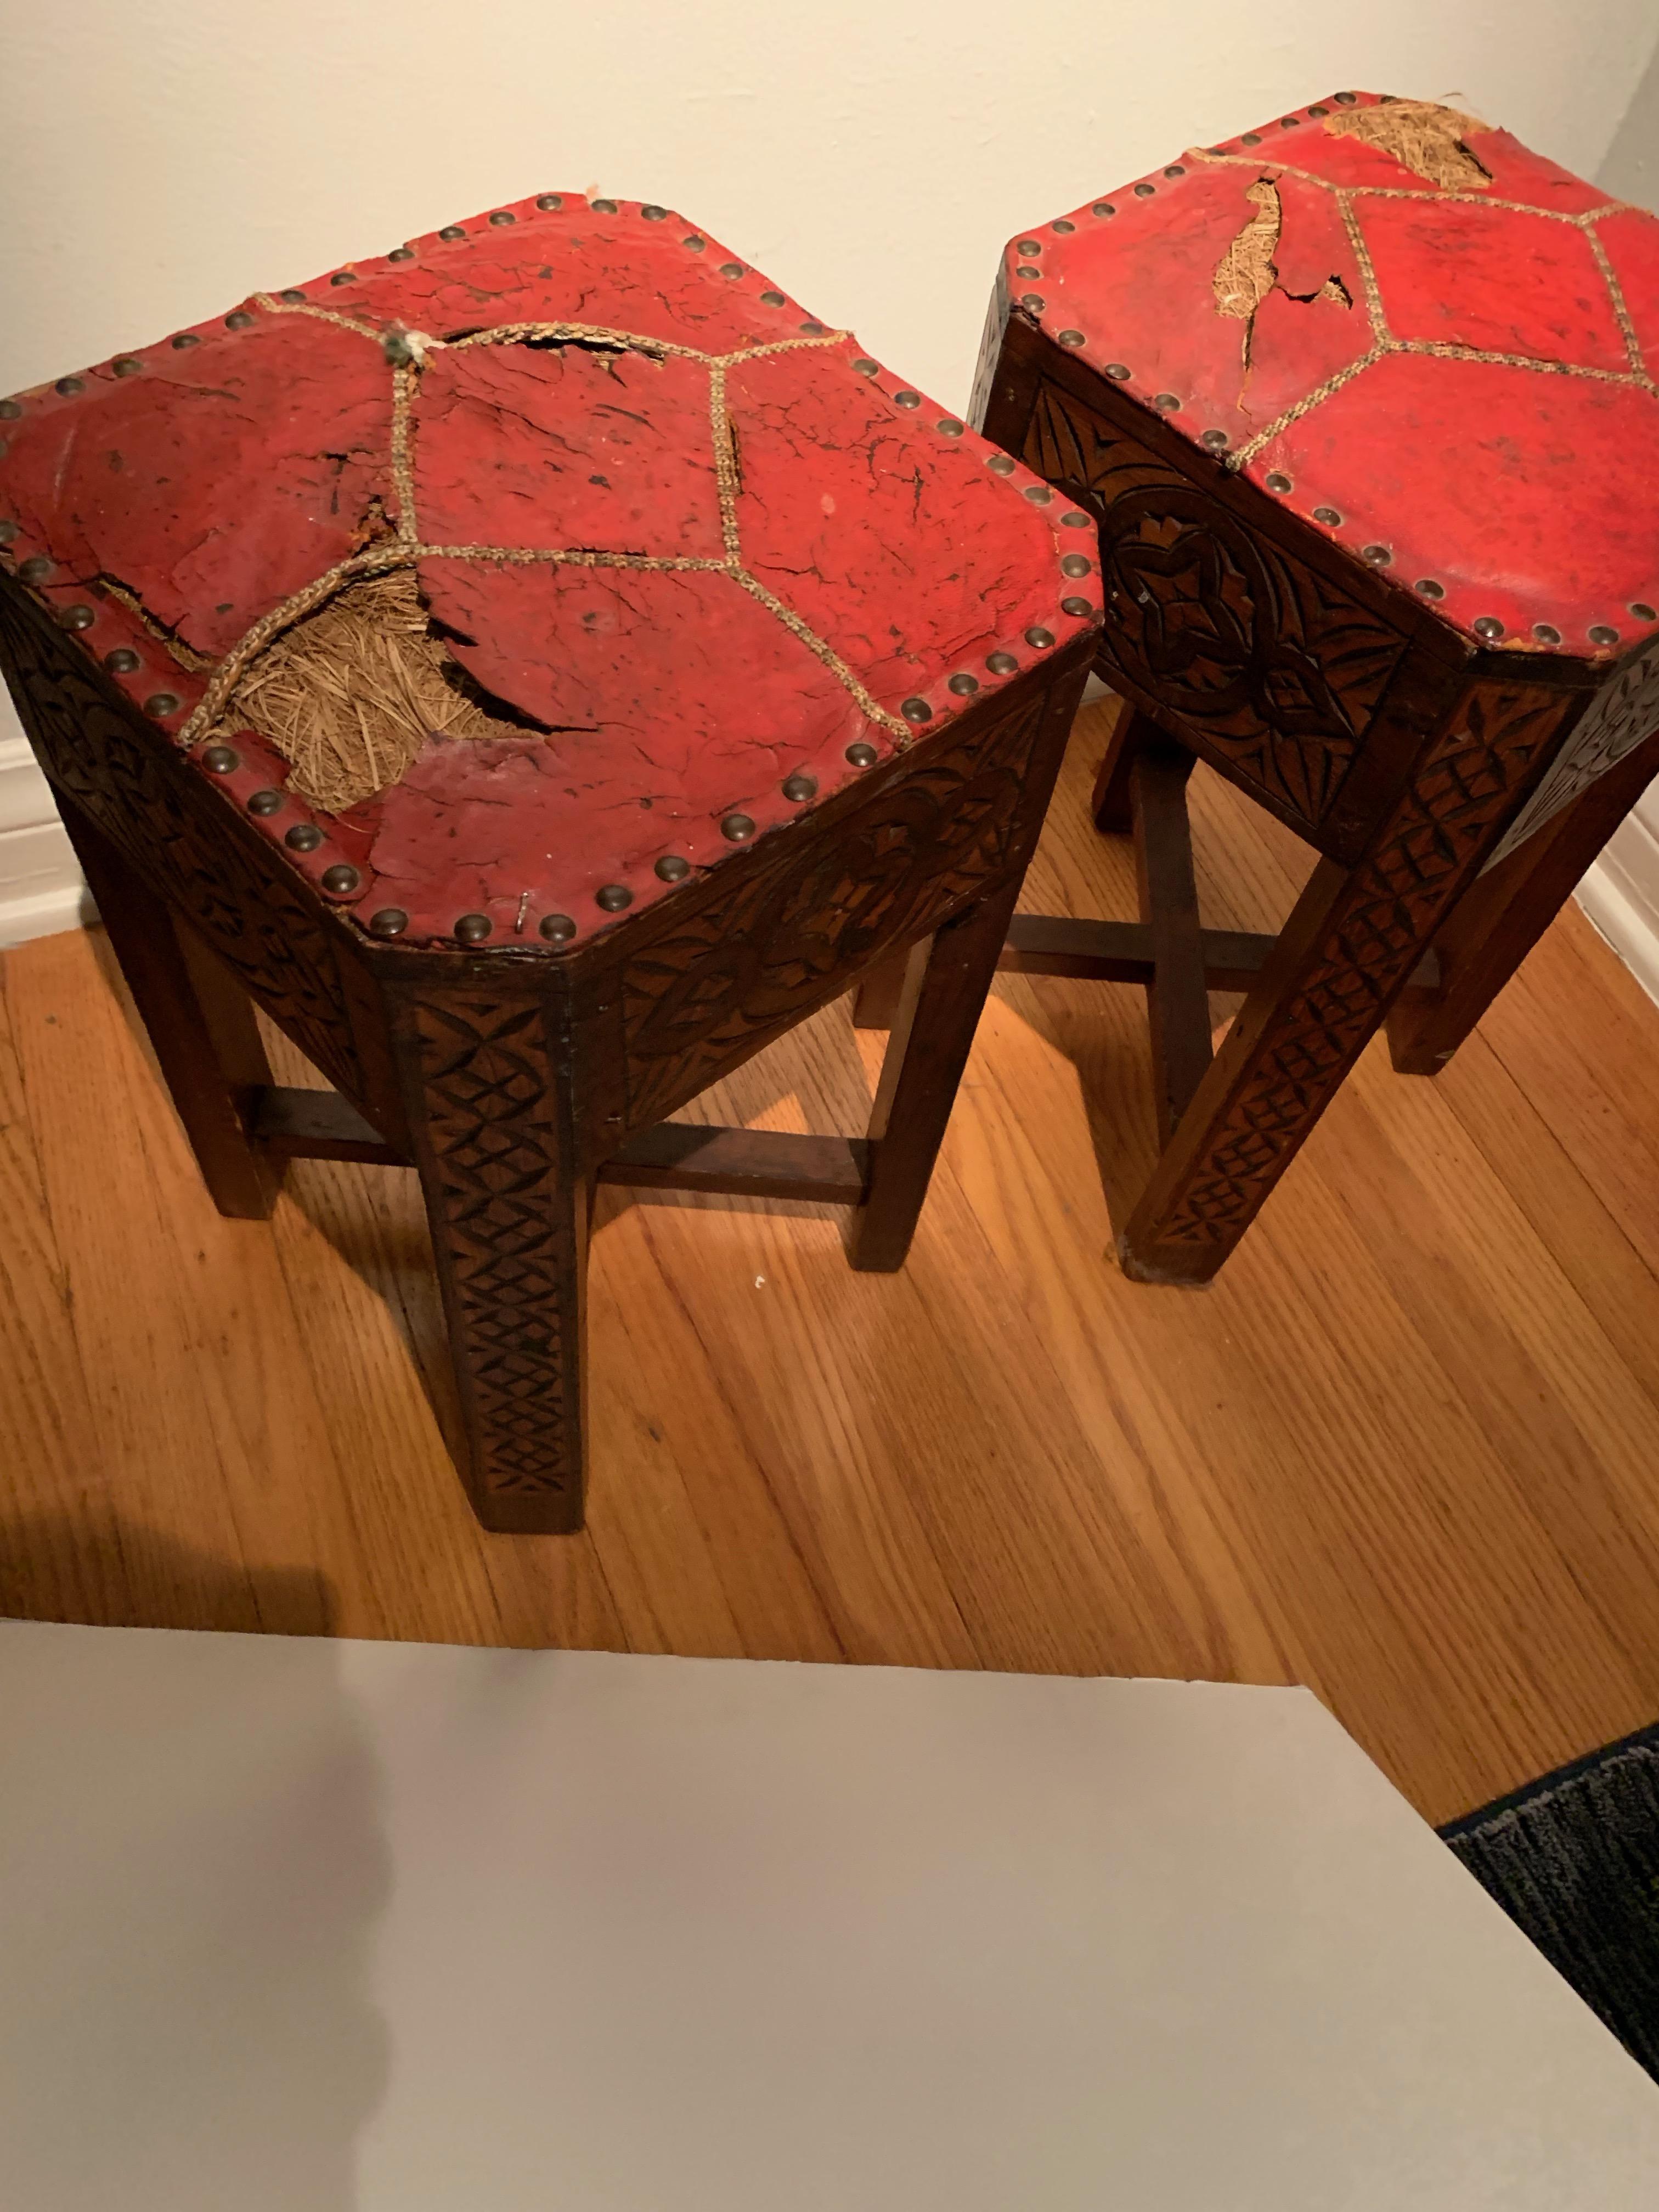 Pair of hand carved Arts & Crafts stools, the unique and rare pair have been kept in the original condition with intricate woven seams. The cracked and patinated red leather has exposed horse hair, suited for the most unique spaces. Well made and